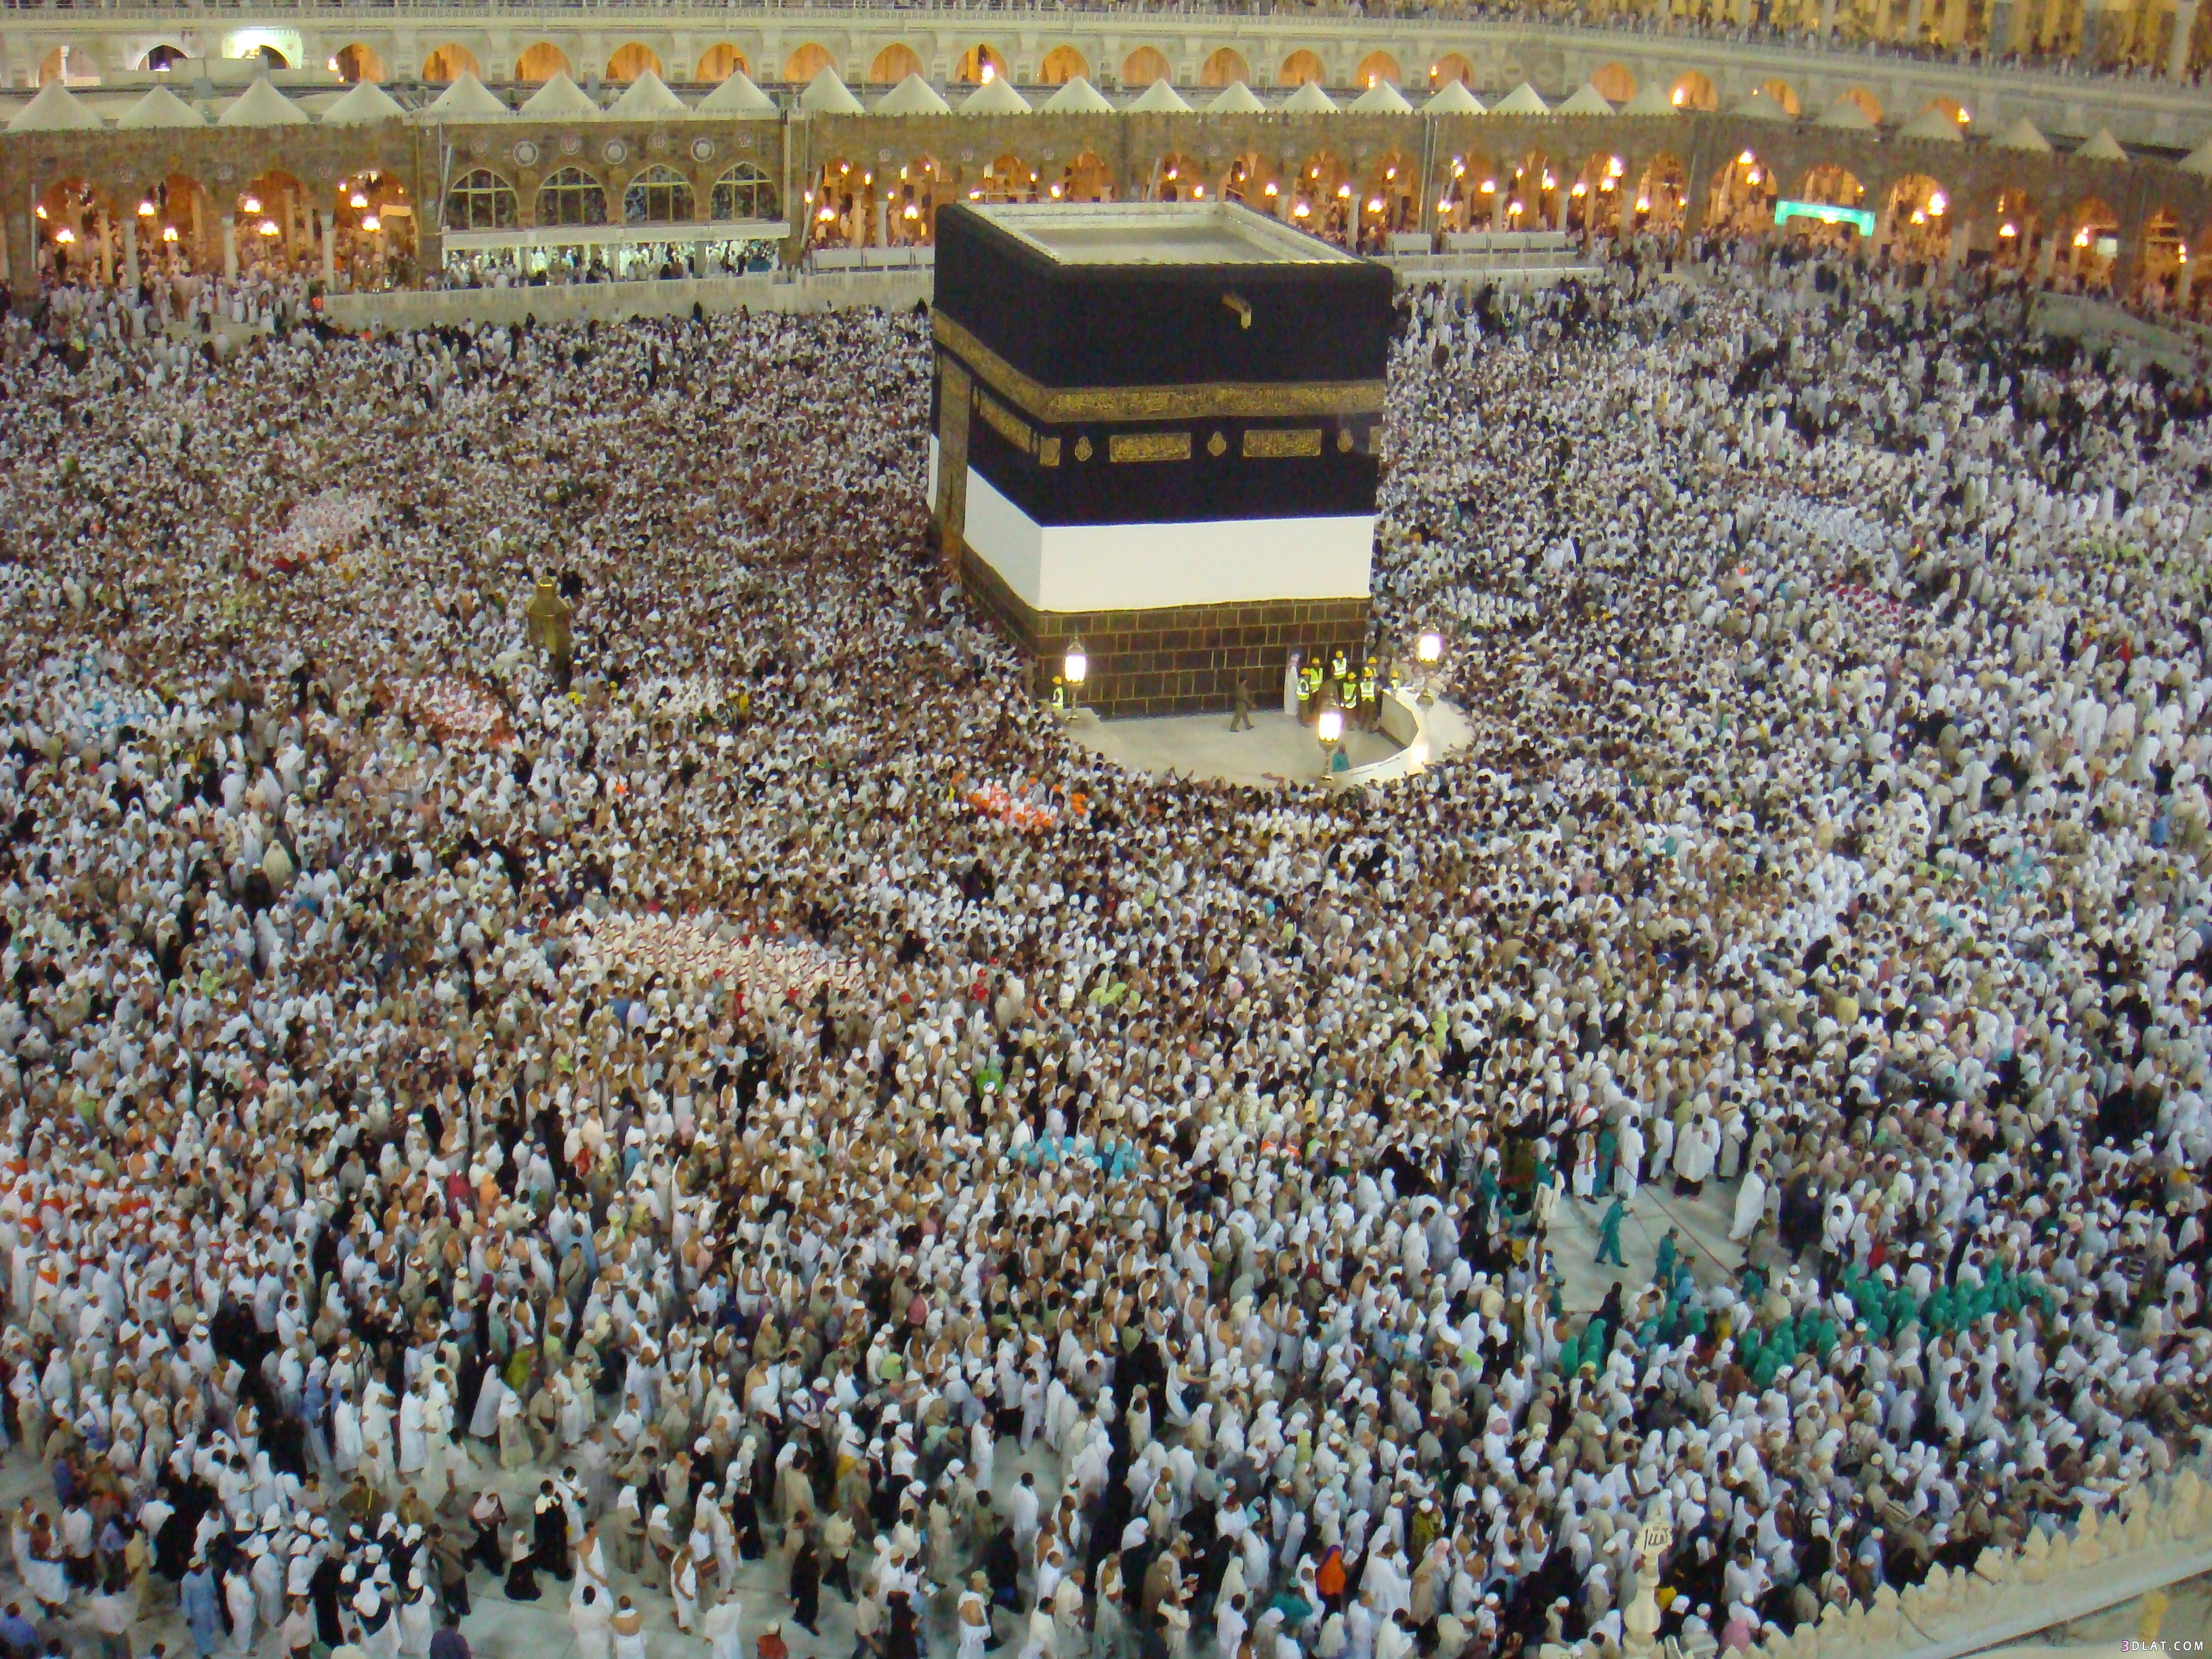 If a man has done the obligatory Hajj, is it better for him to repeat Hajj